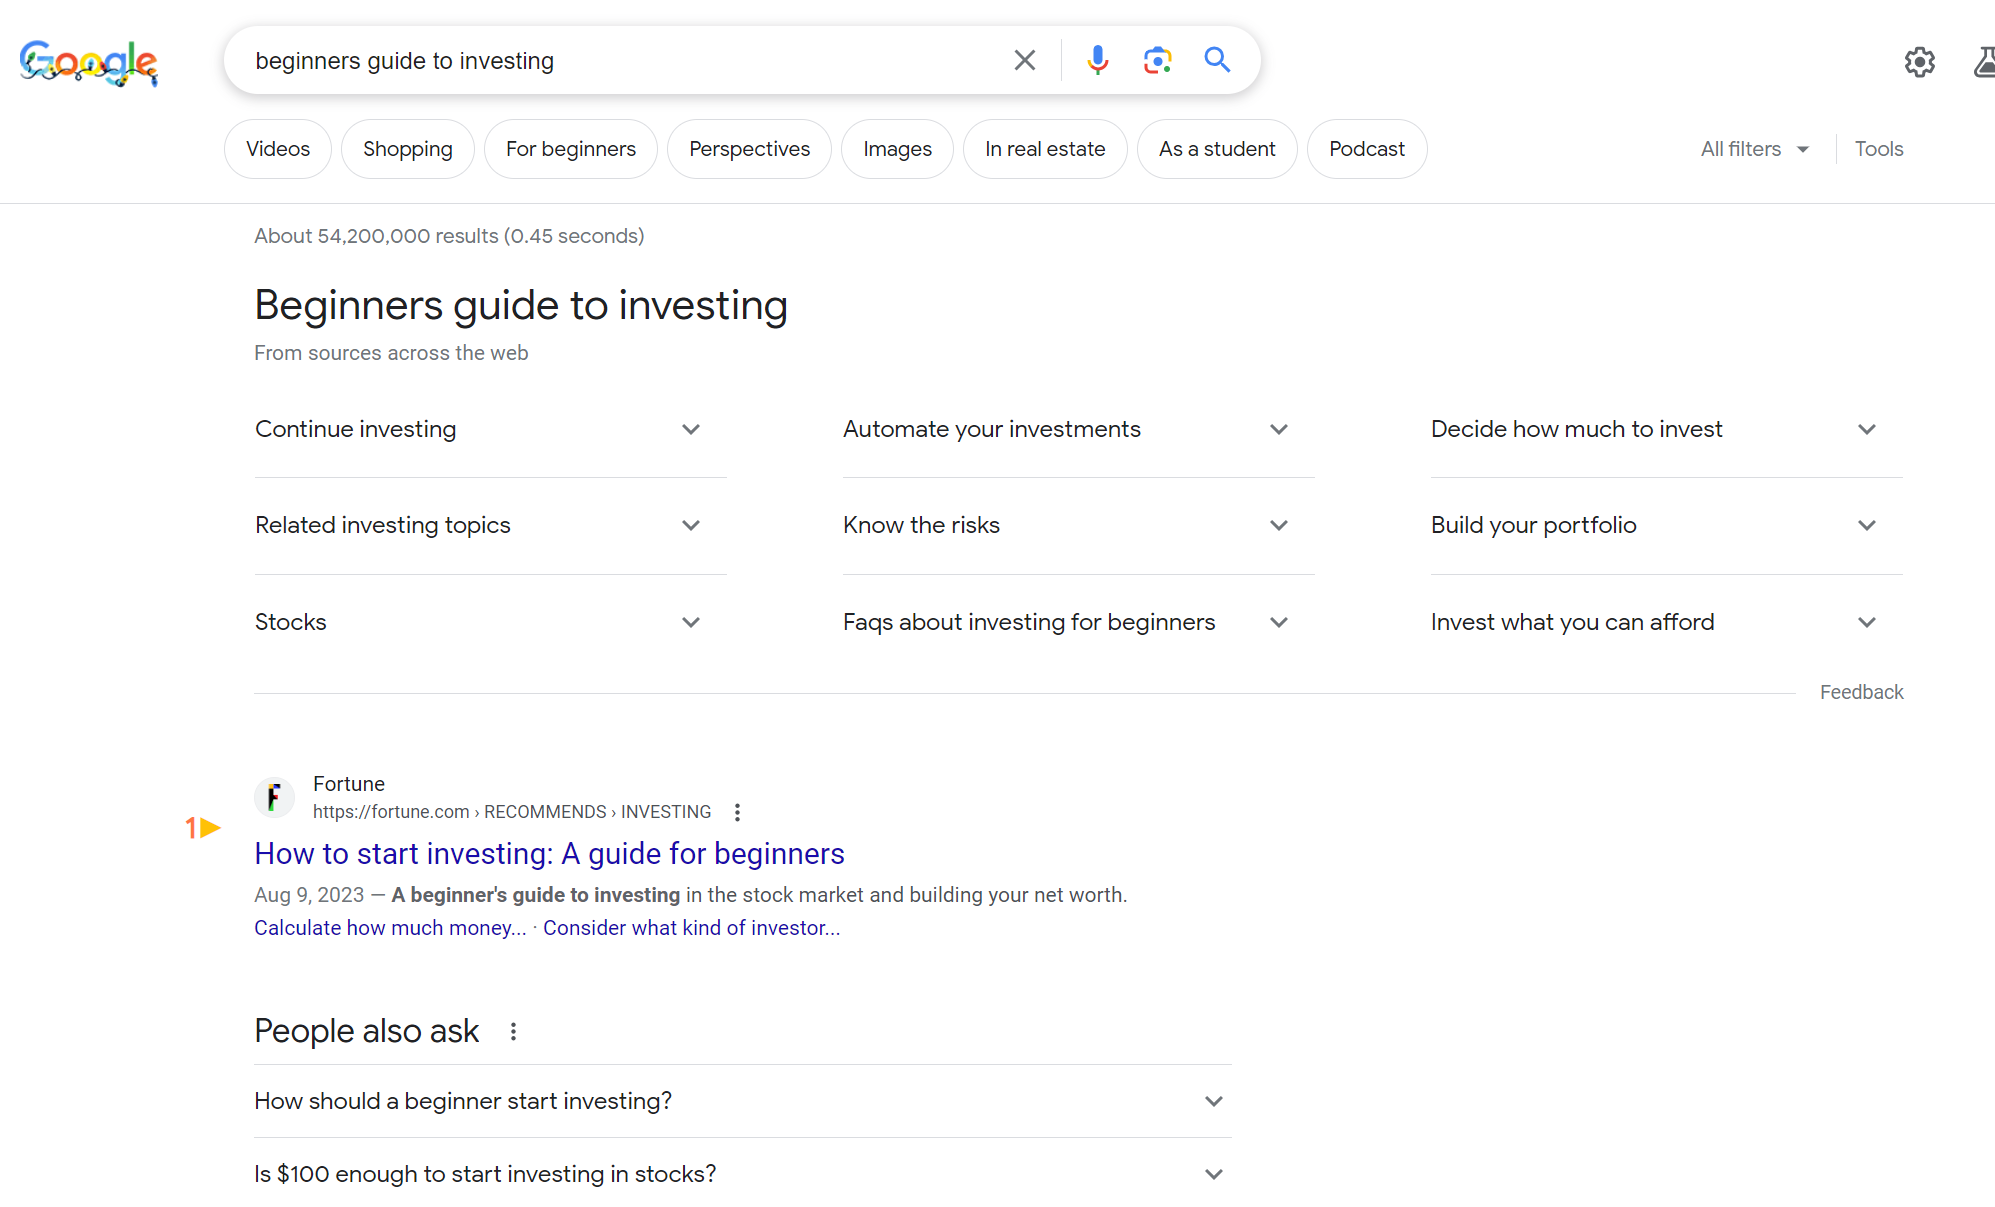 Screenshot from search for [beginners guide to investing]